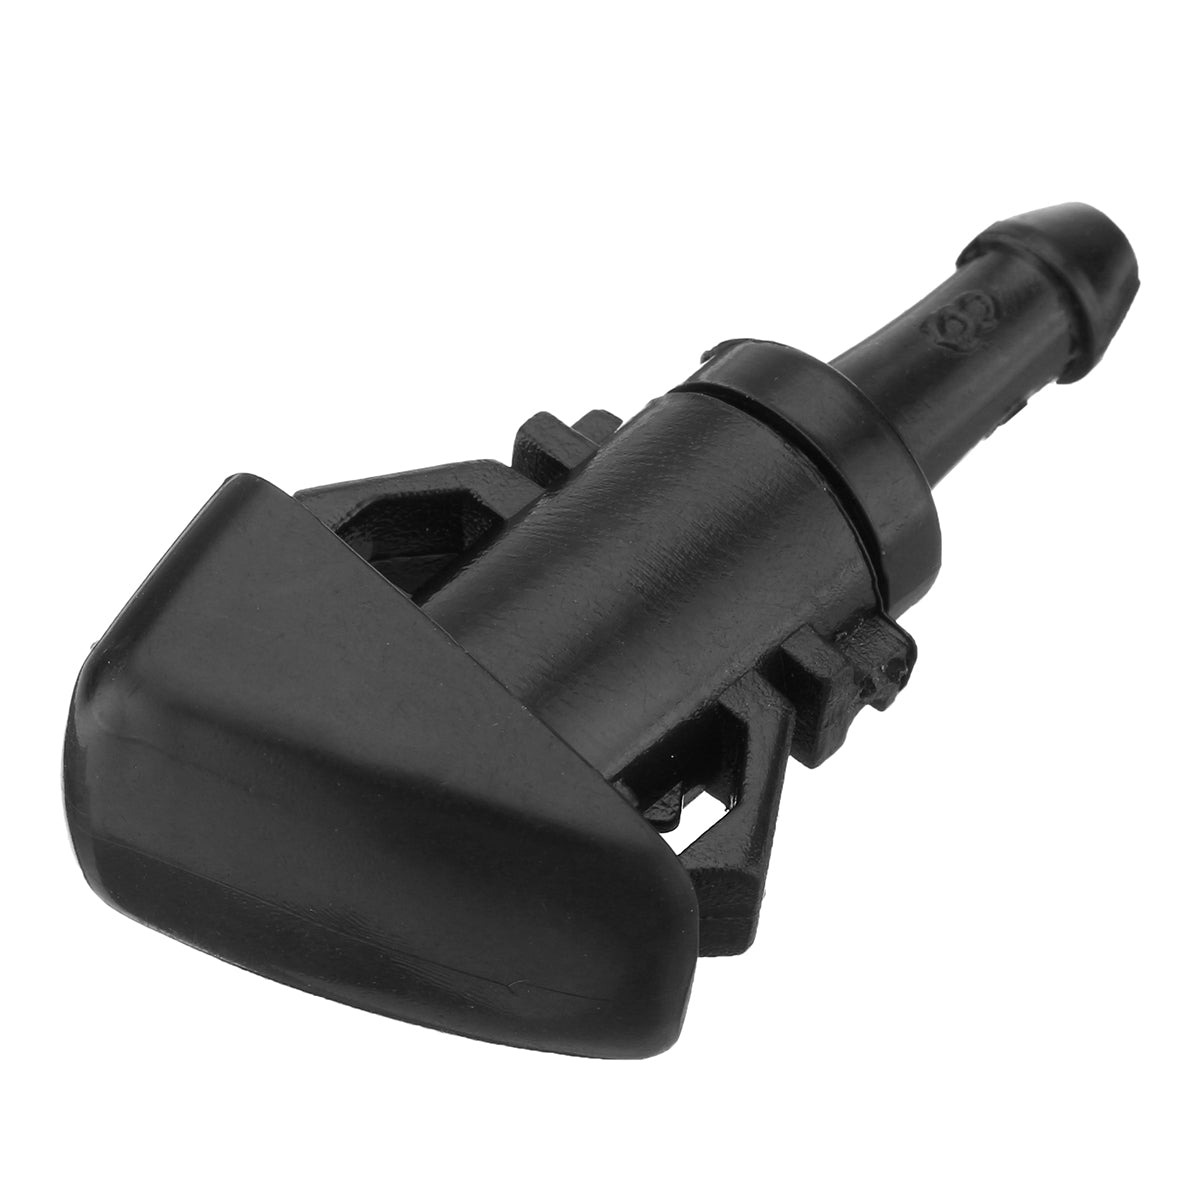 Dark Slate Gray Windshield Washer Wiper Water Spray Nozzle For Chrysler 300 Dodge Ram Charger